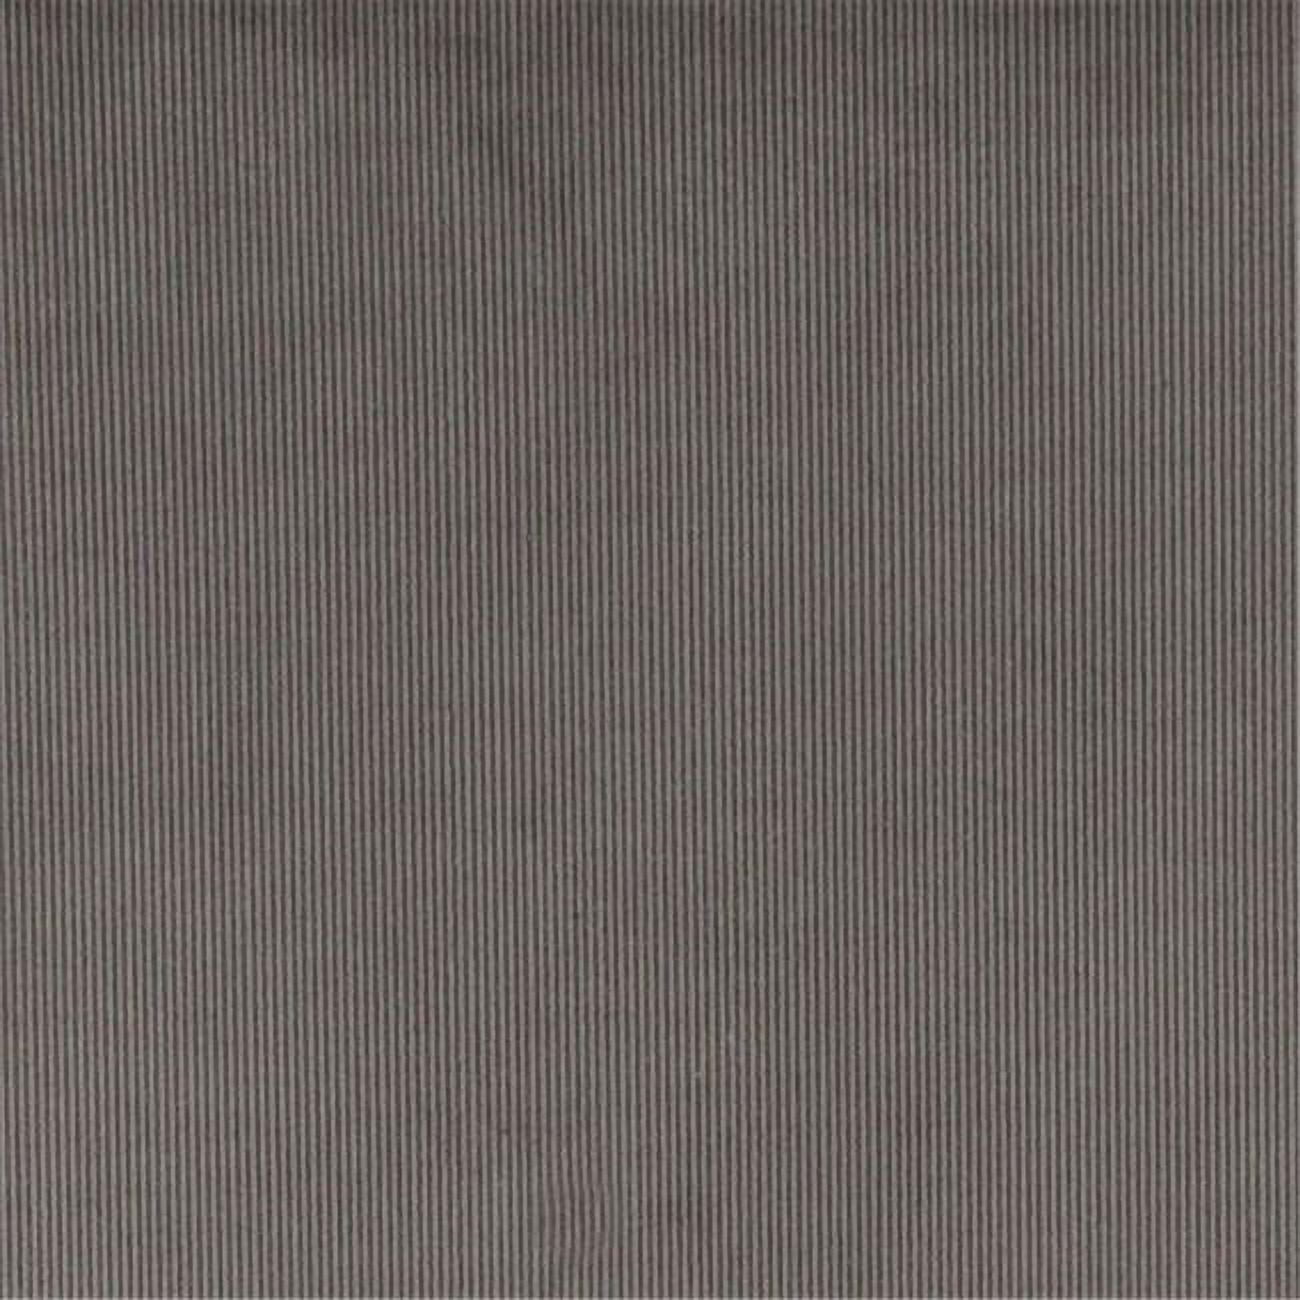 Mink Brown Corduroy Upholstery Fabric, 54 Wide